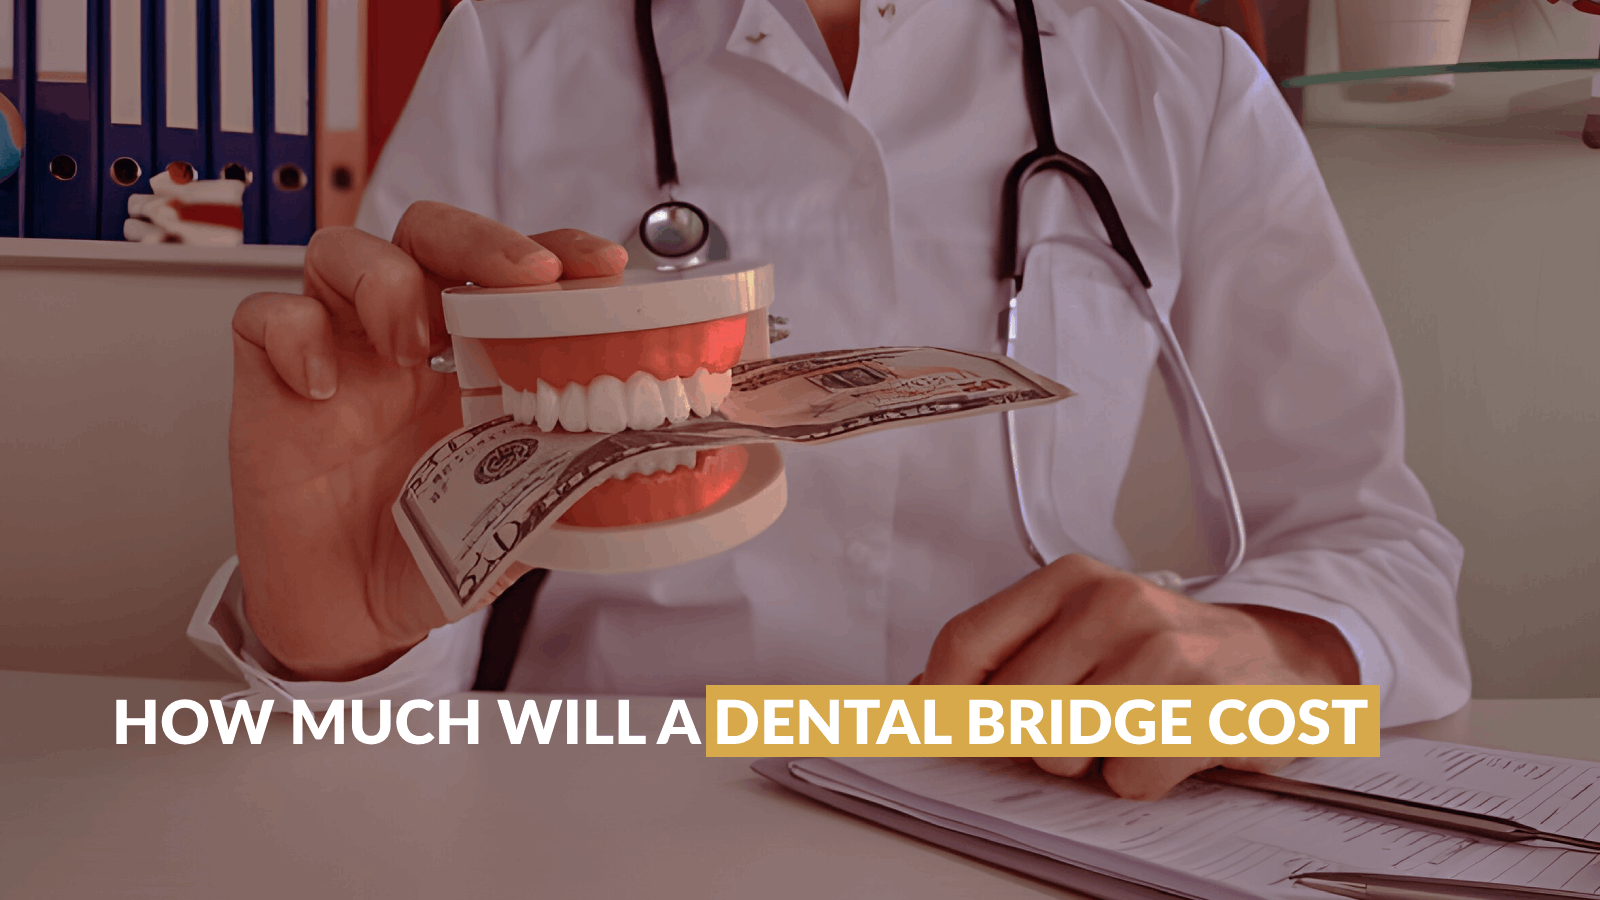 How much will a dental bridge cost?